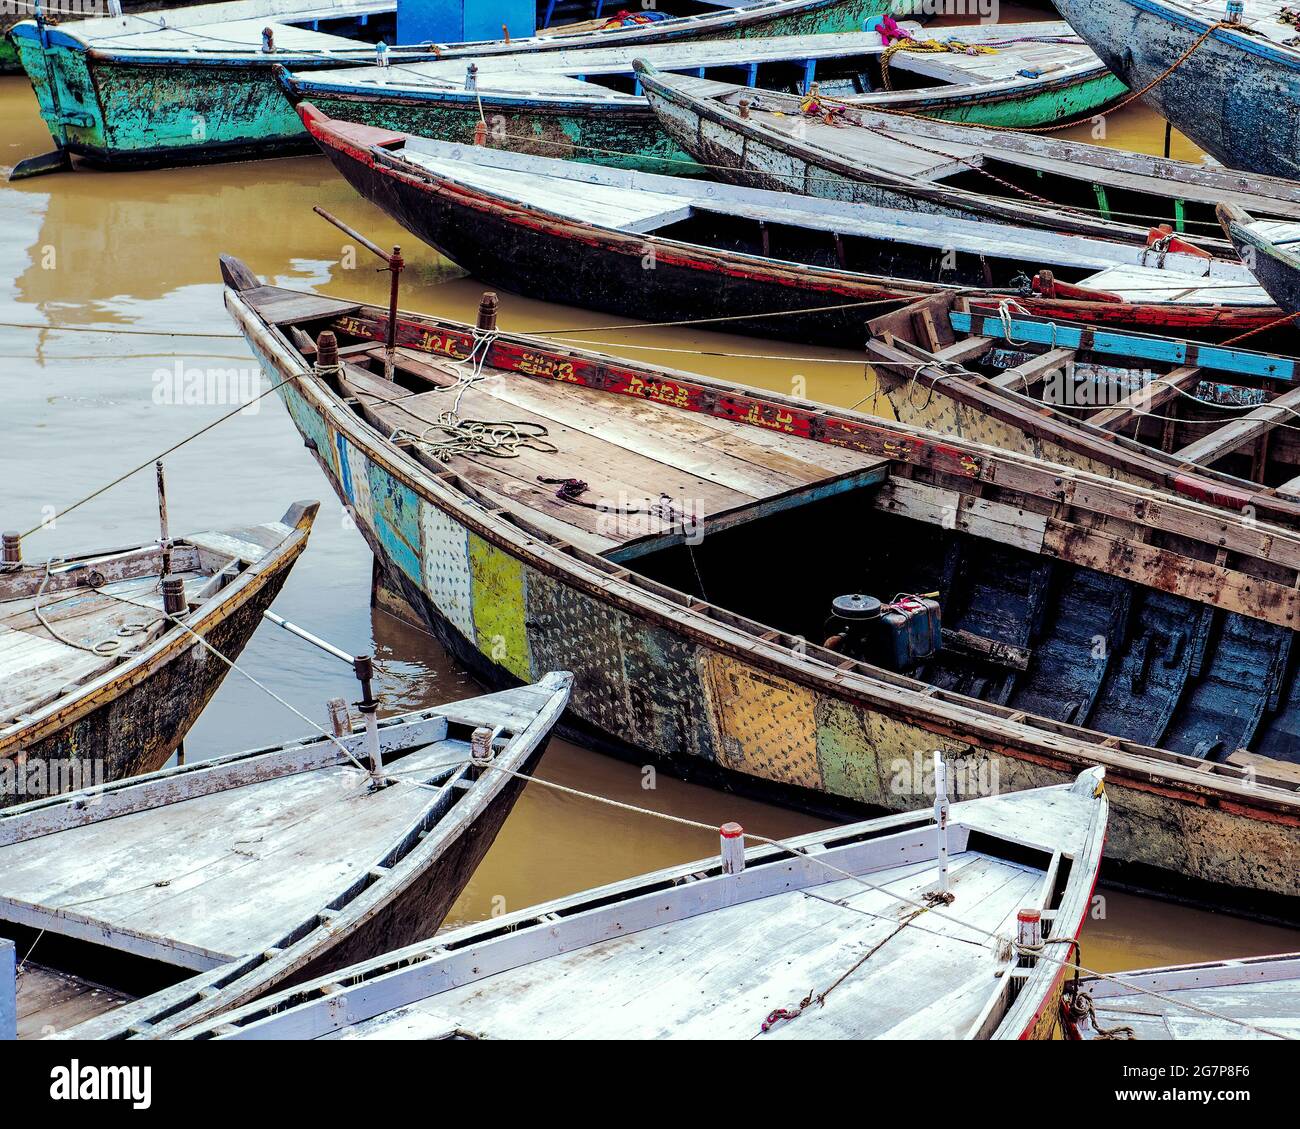 Several, colorful, handmade boats all together in the Ganges River, Varanasi, India Stock Photo